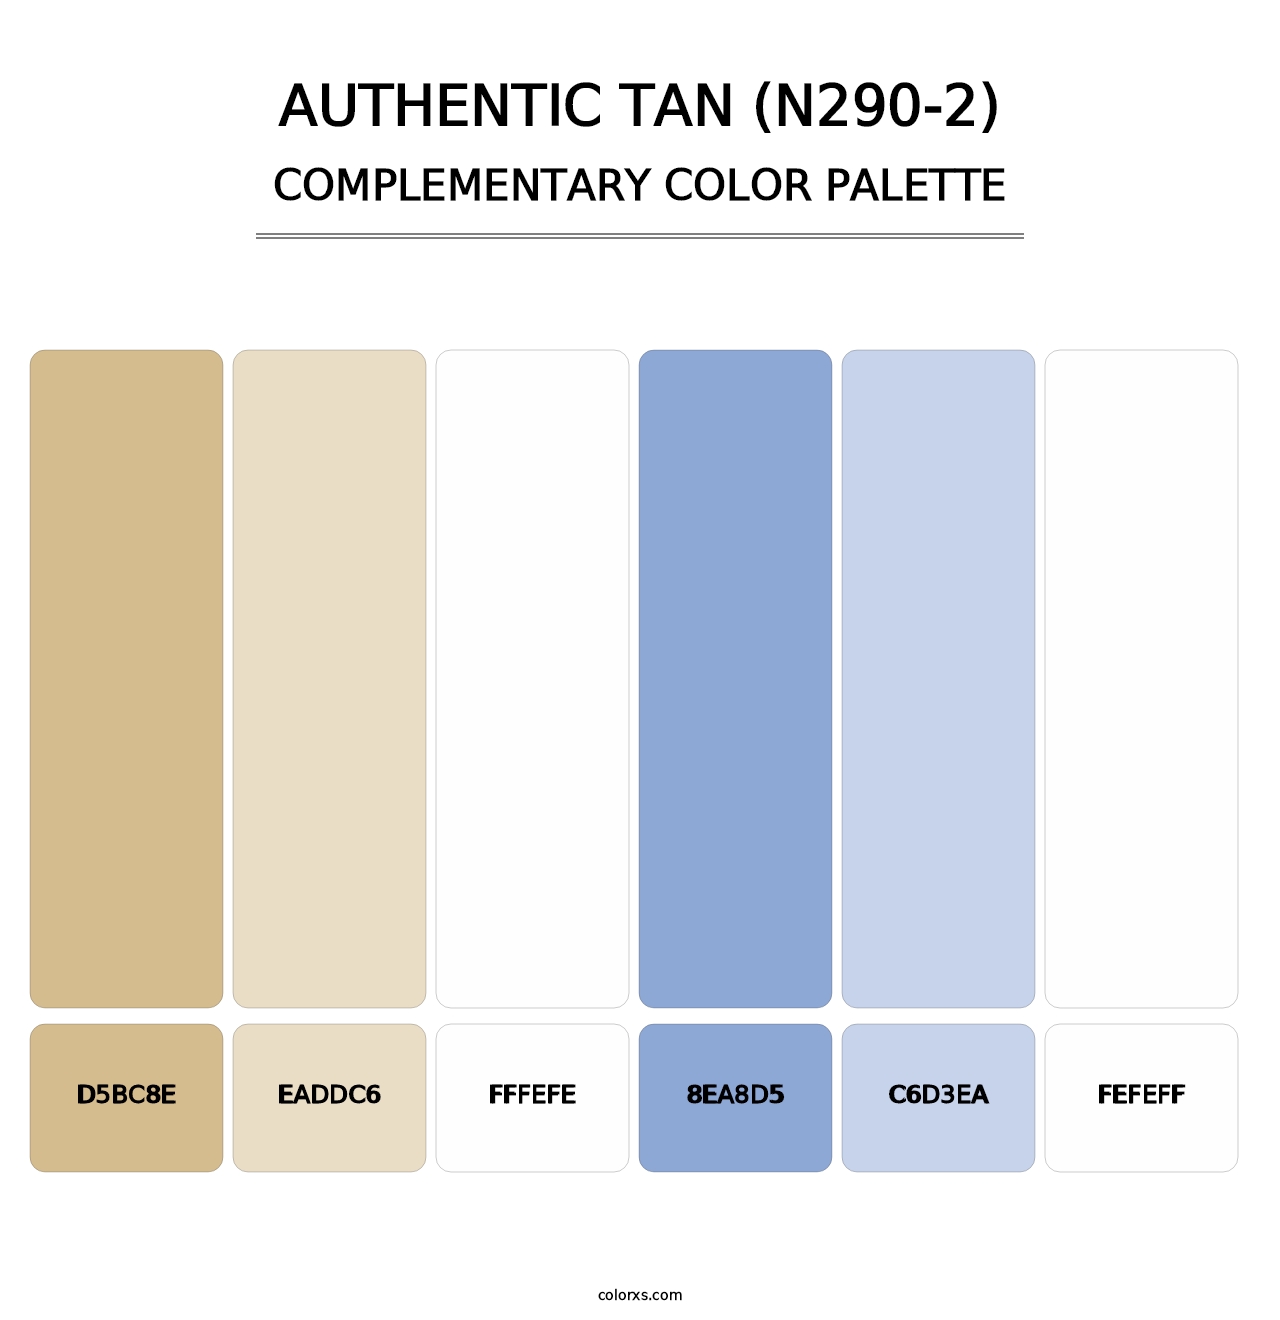 Authentic Tan (N290-2) - Complementary Color Palette